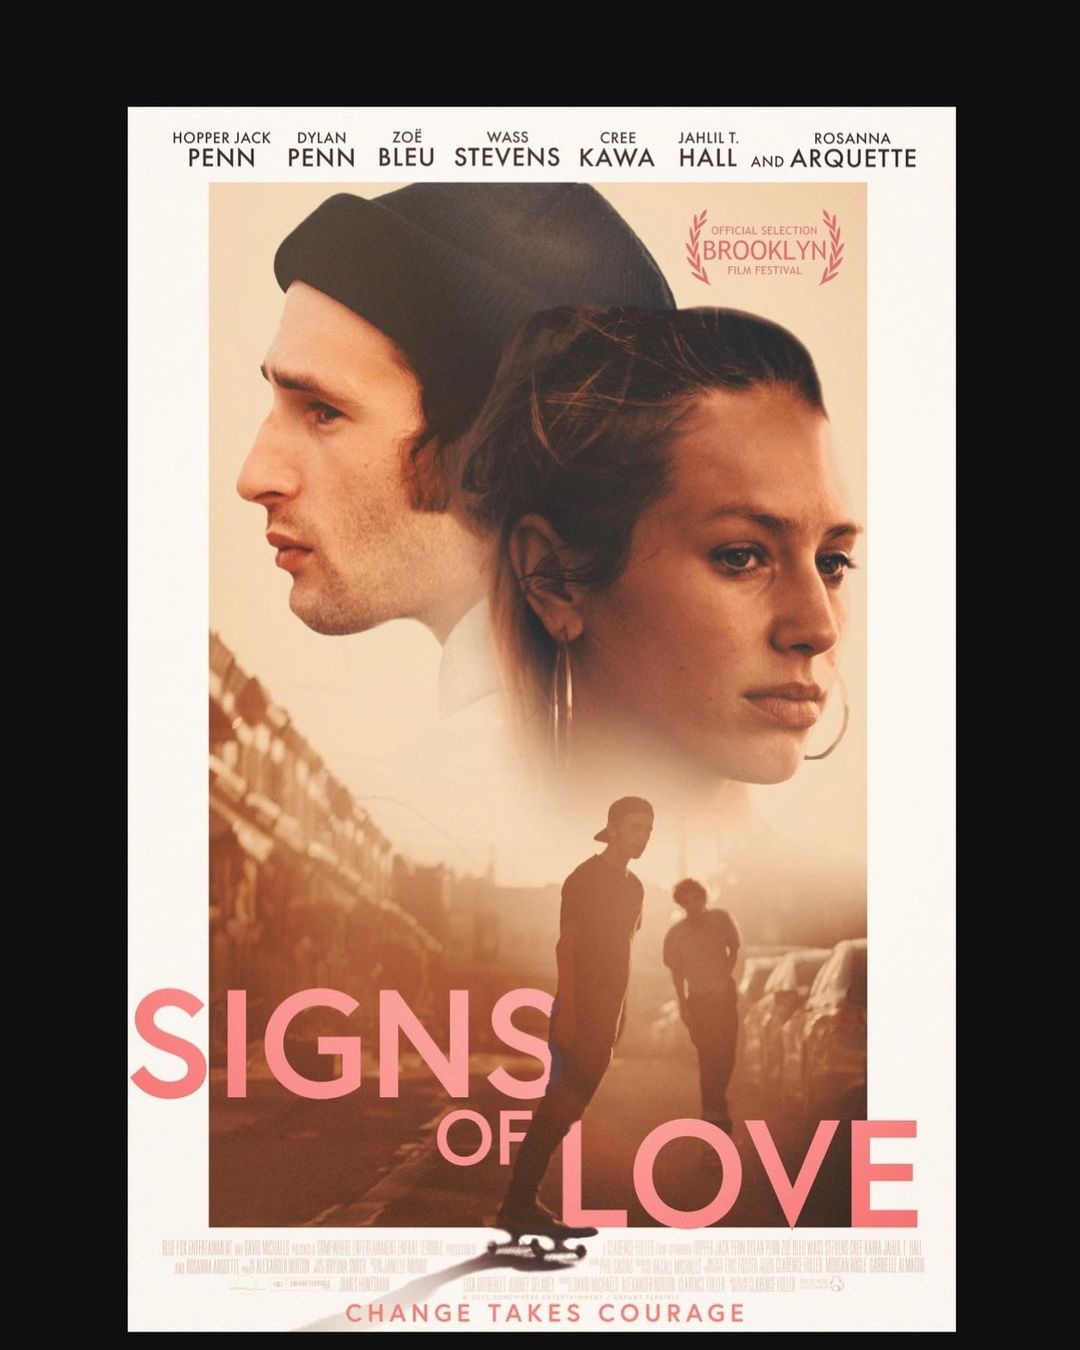 Congratulations to Hopper @at_easeladies , Dylan @iamdylanpenn , and Zoë Bleu Sidel.“Signs of Love” Premiering at the Brooklyn Film Festival today!